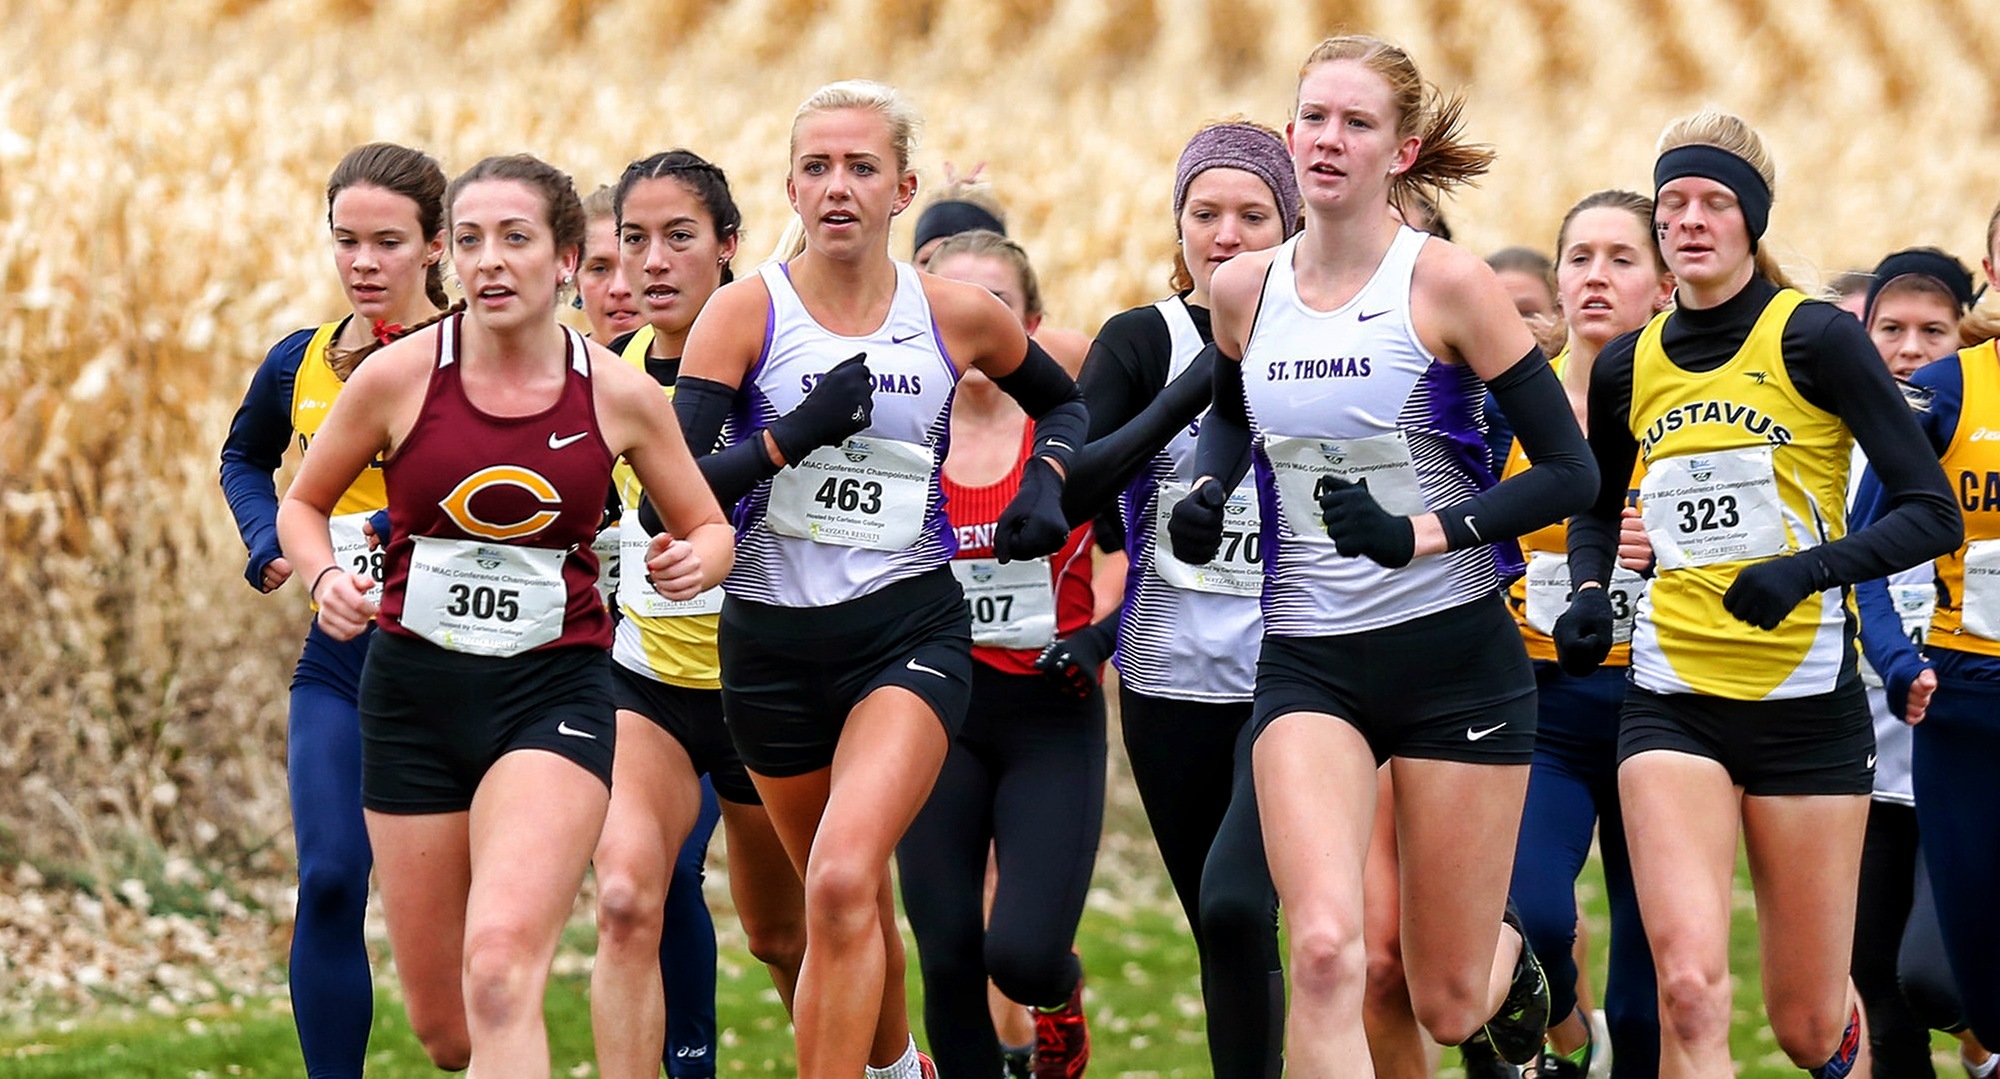 Junior Meritt Miller leads a pack of runners at the MIAC Championship Meet. She went on to earn All-Conference honors for the first time in her career. (Photo courtesy of Nathan Lodermeier)